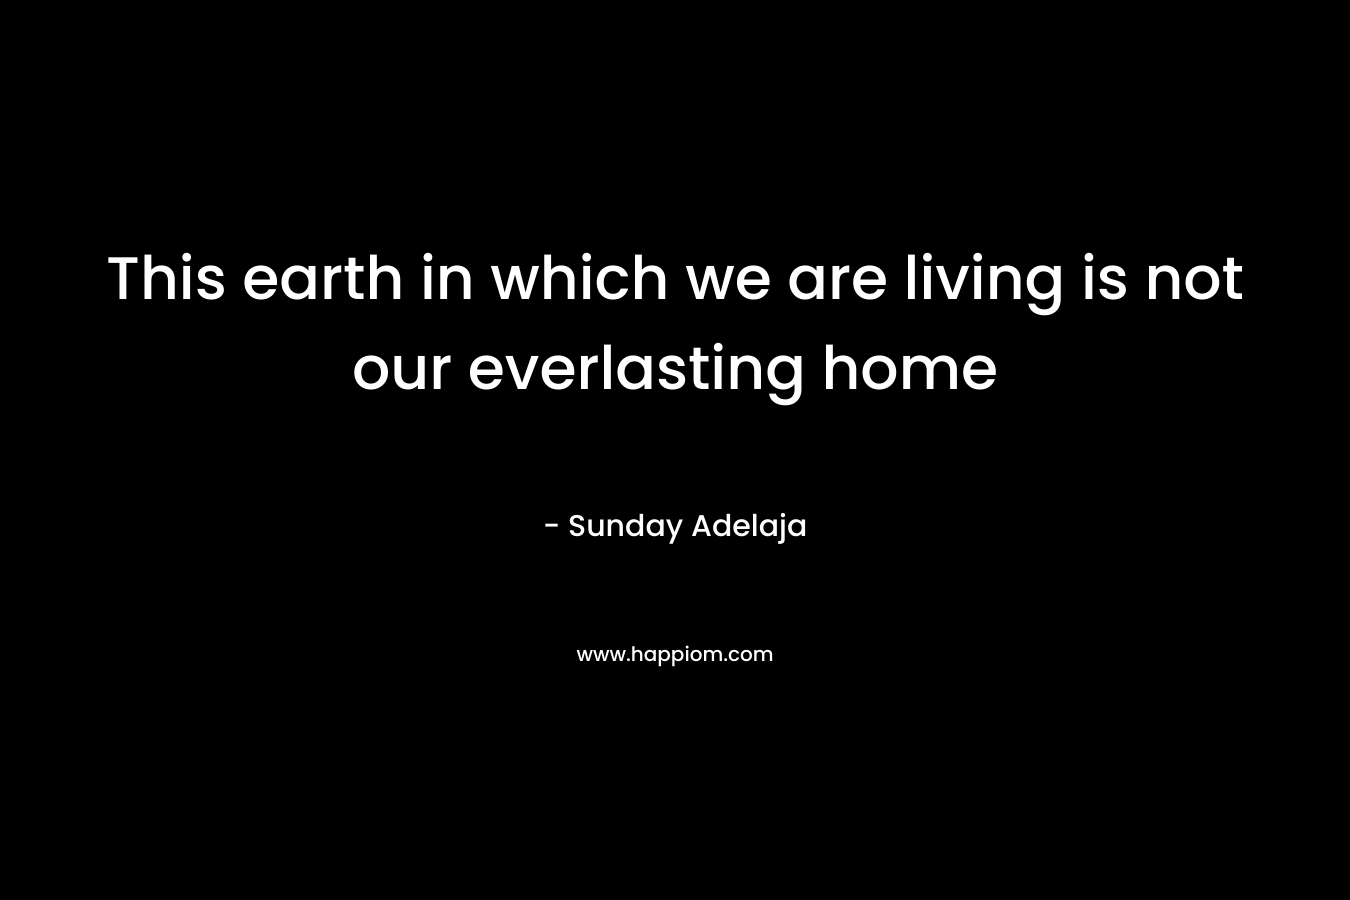 This earth in which we are living is not our everlasting home